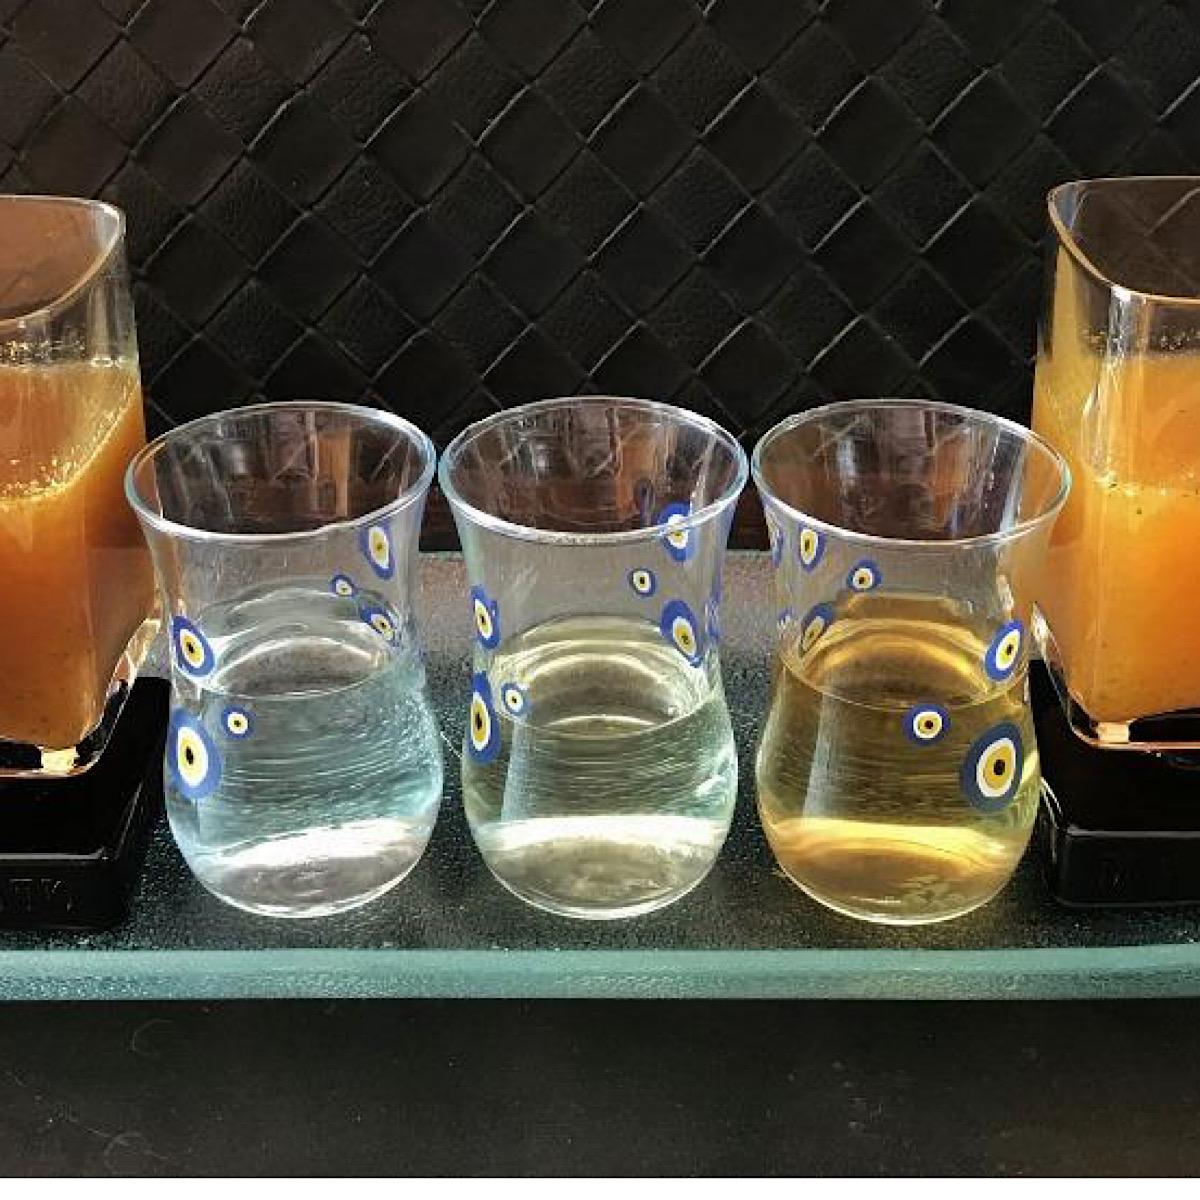 Tequila flight with two Sangritas